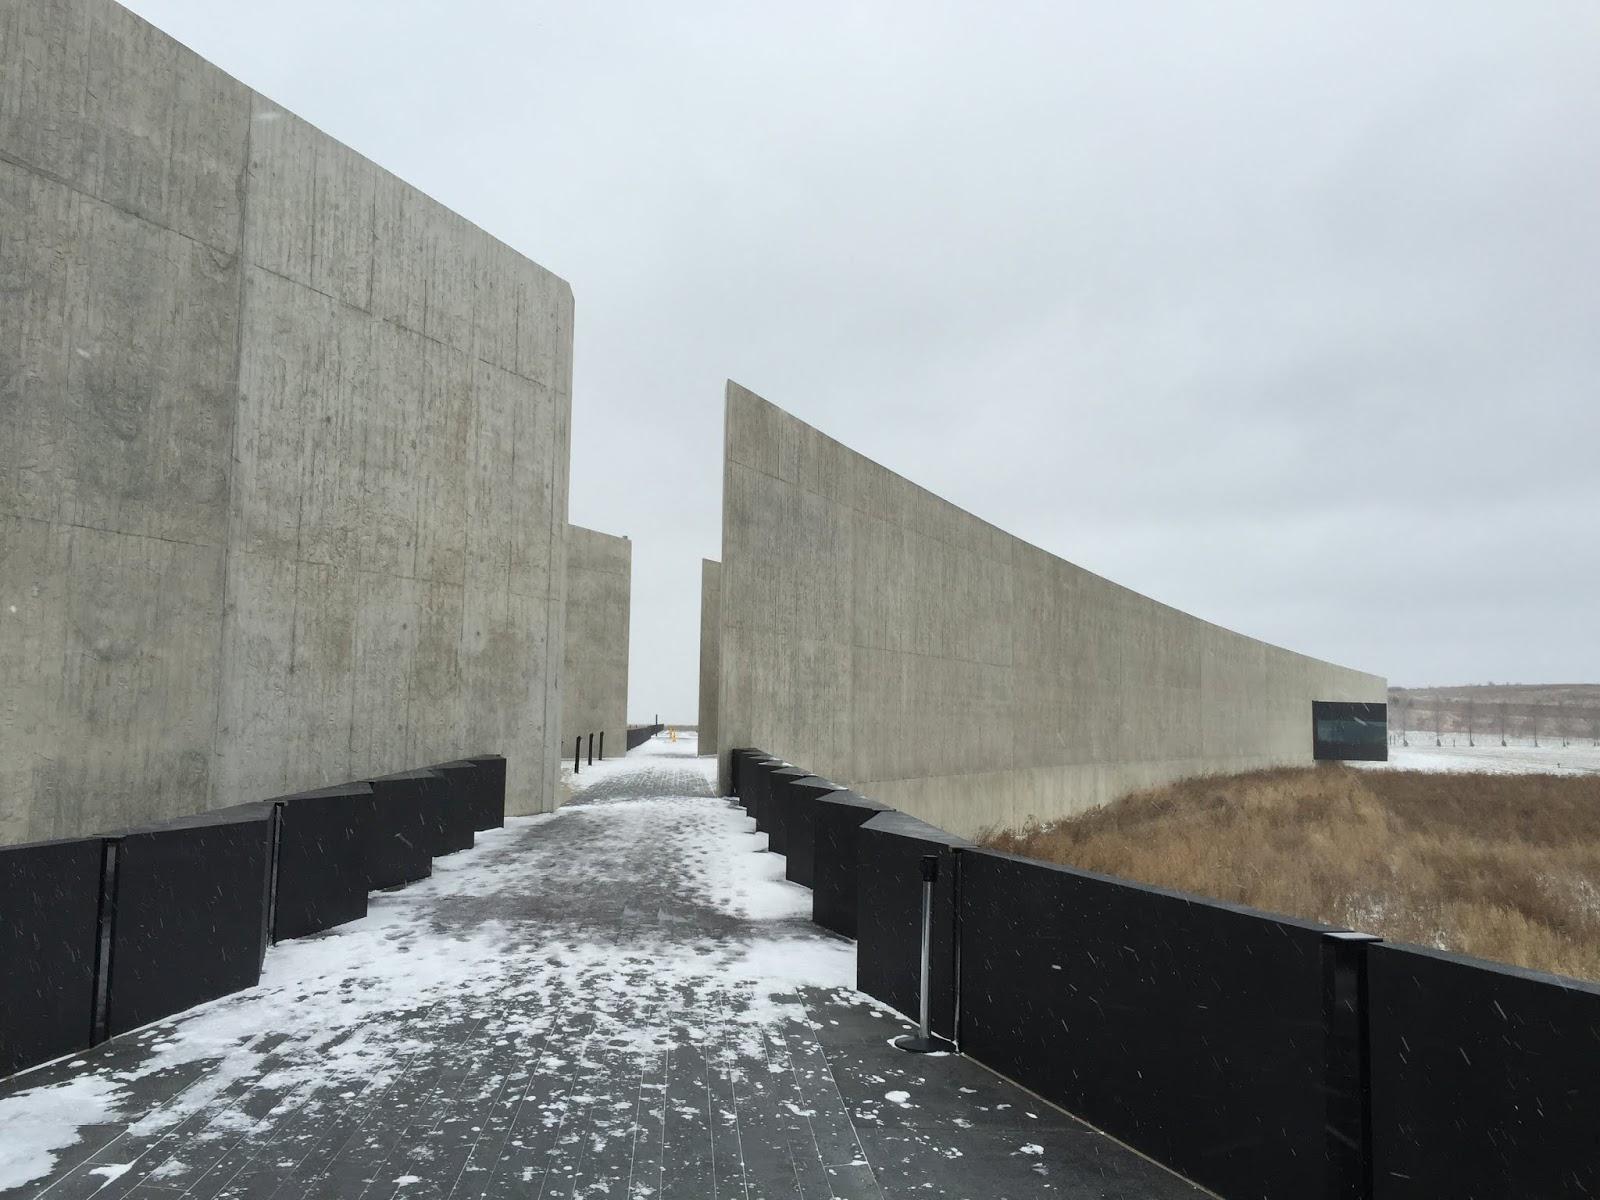 Concrete walls reflect the glide path of the doomed jet/NPS